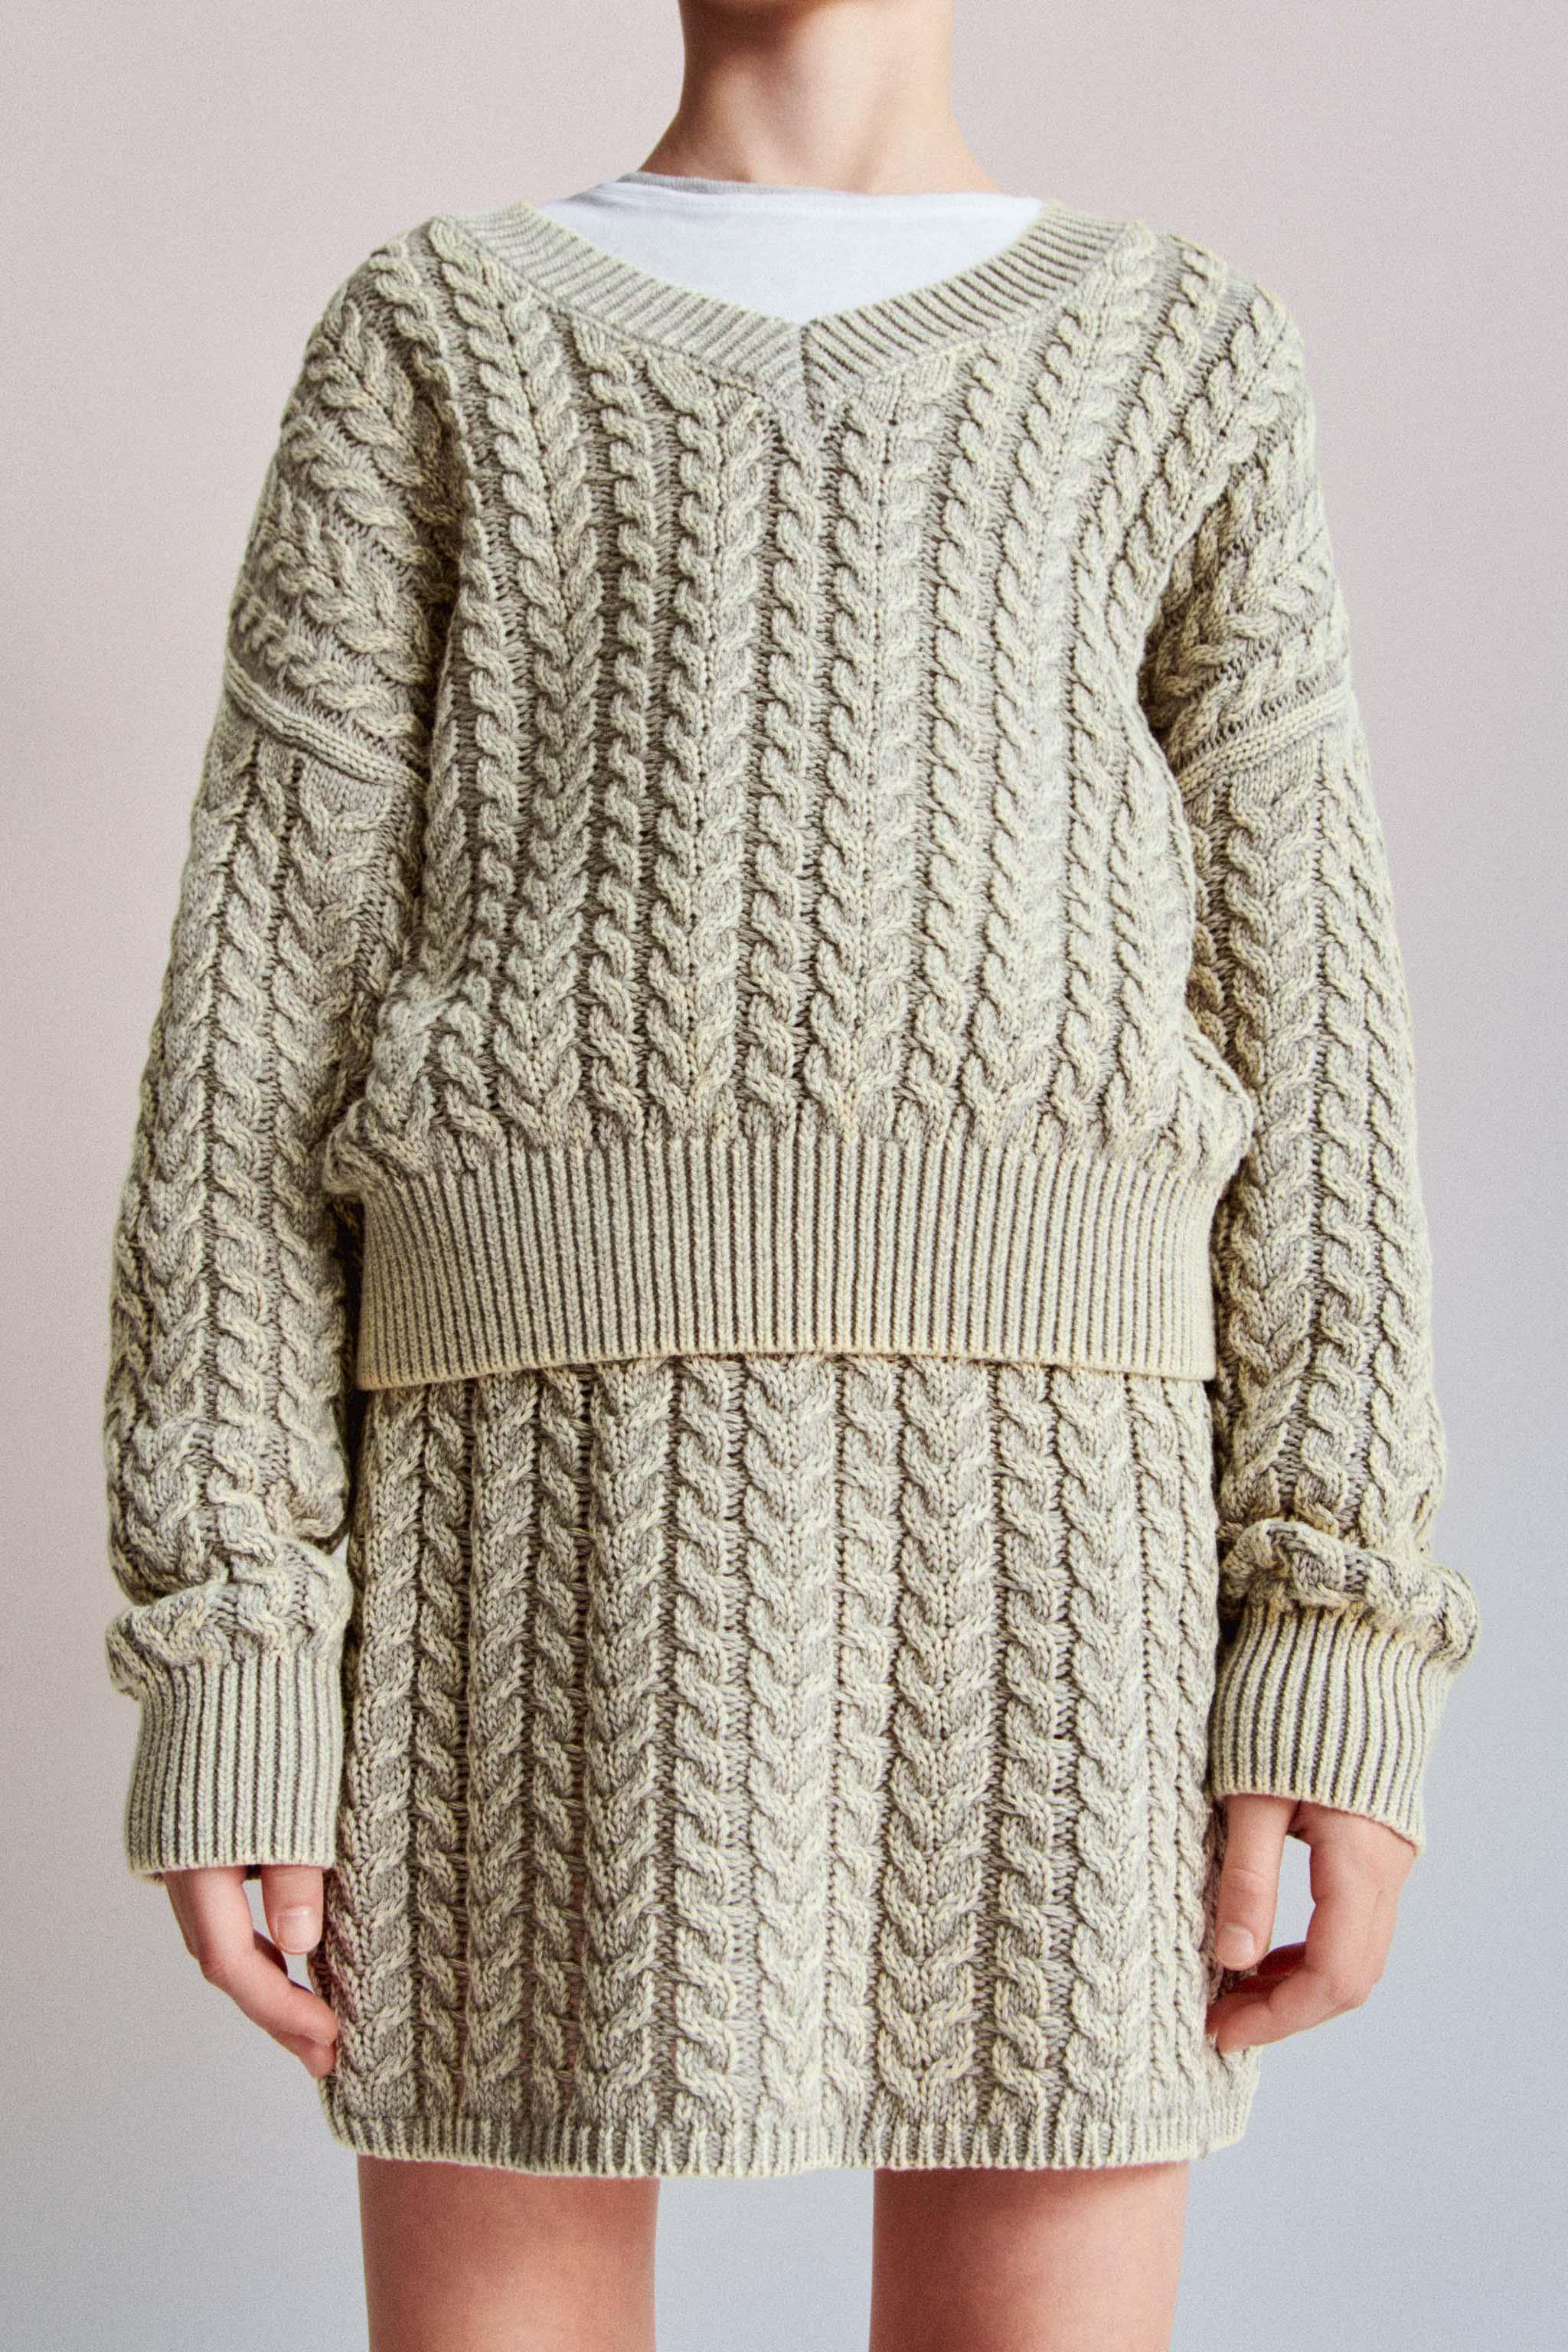 ZARA NEW WOMAN Sweater With Braided Sleeves Pink S,M,L Ref. 6873